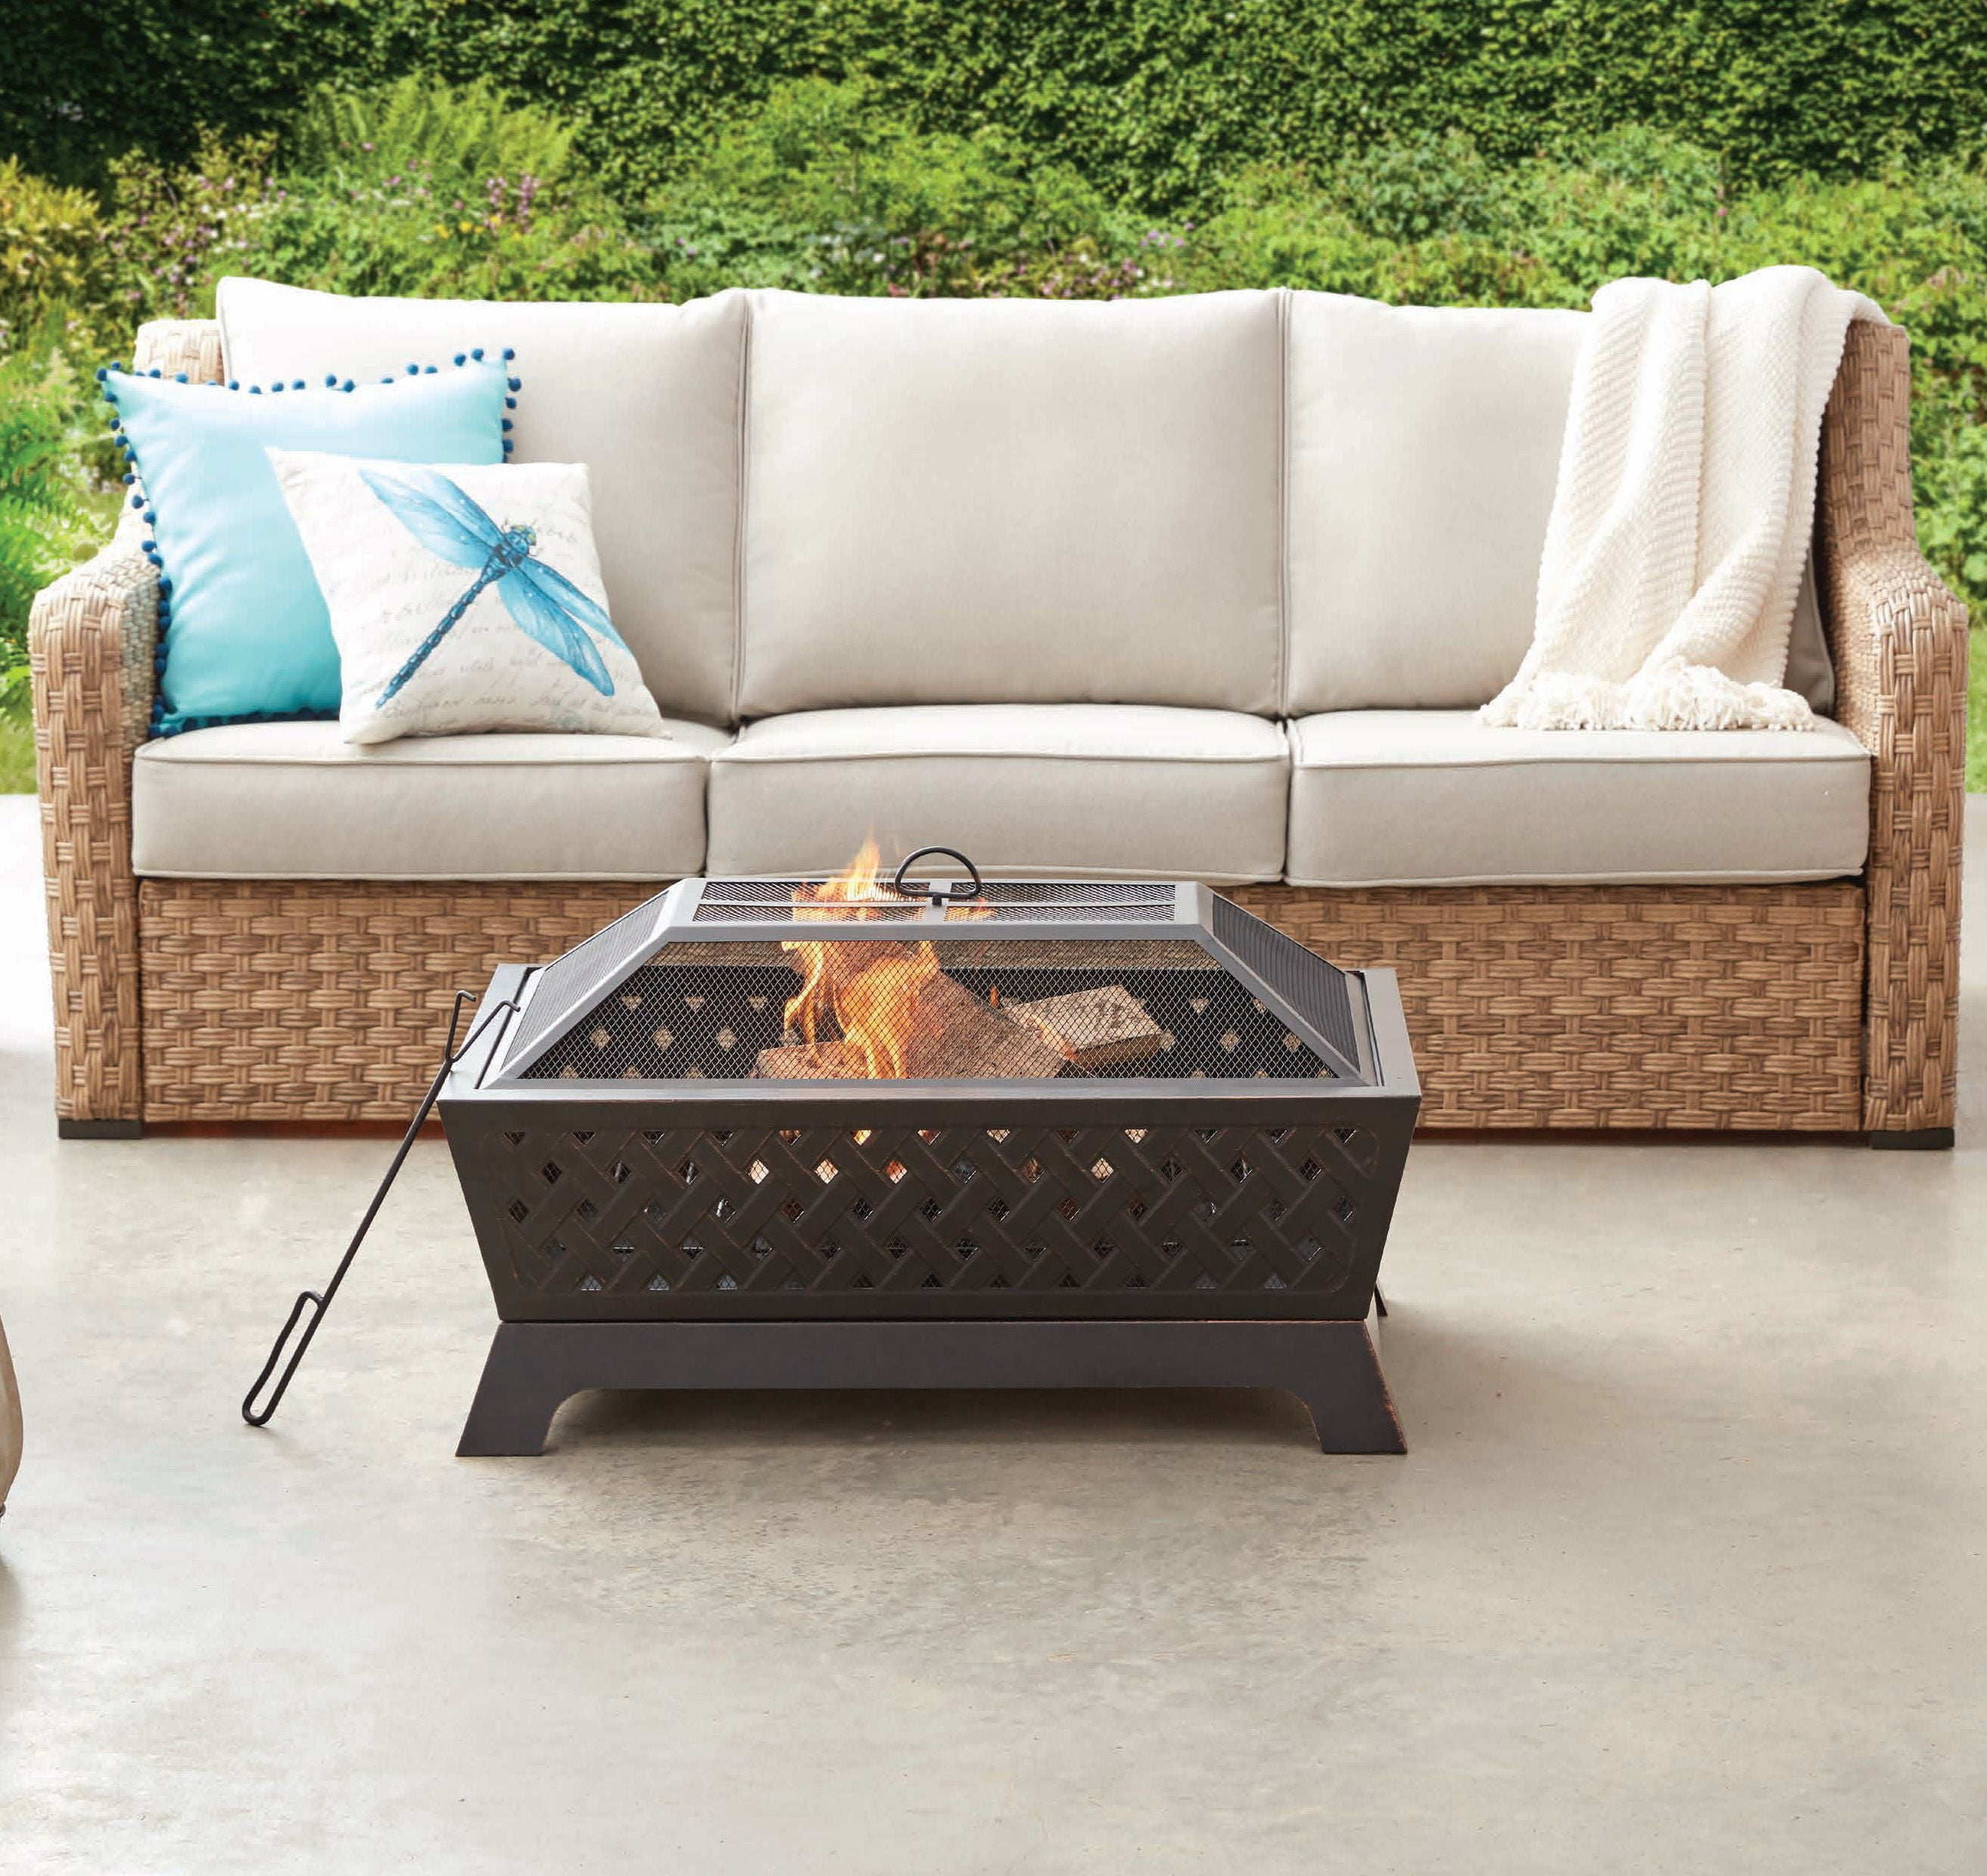 Basics 34-Inch Natural Stone Fire Pit with Copper Accents 